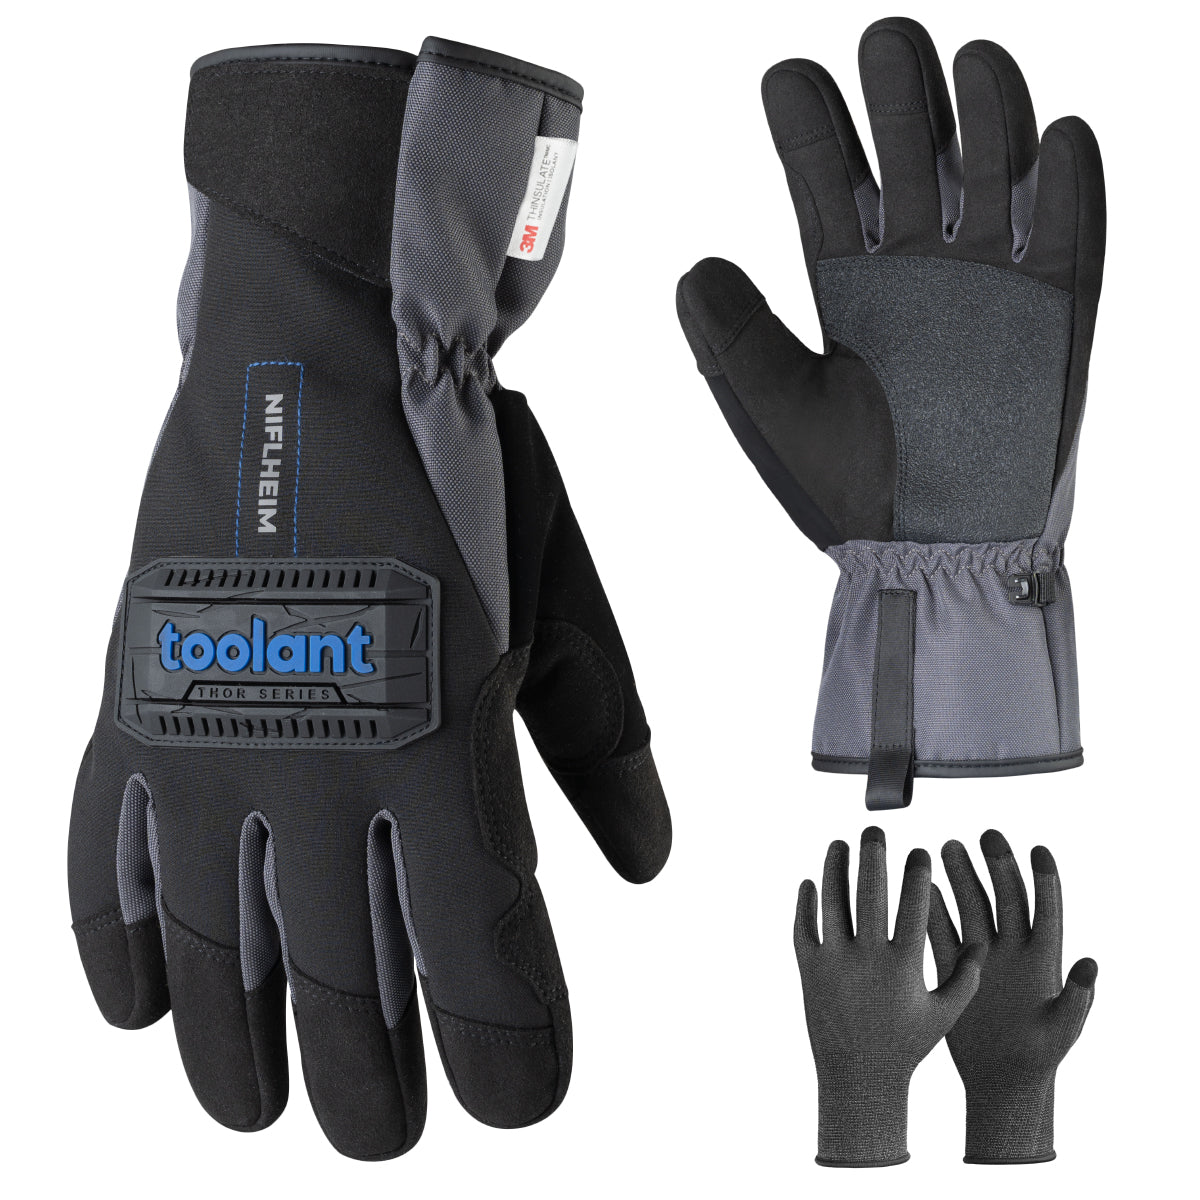 Large Winter General Purpose Gloves with Thinsulate Liner